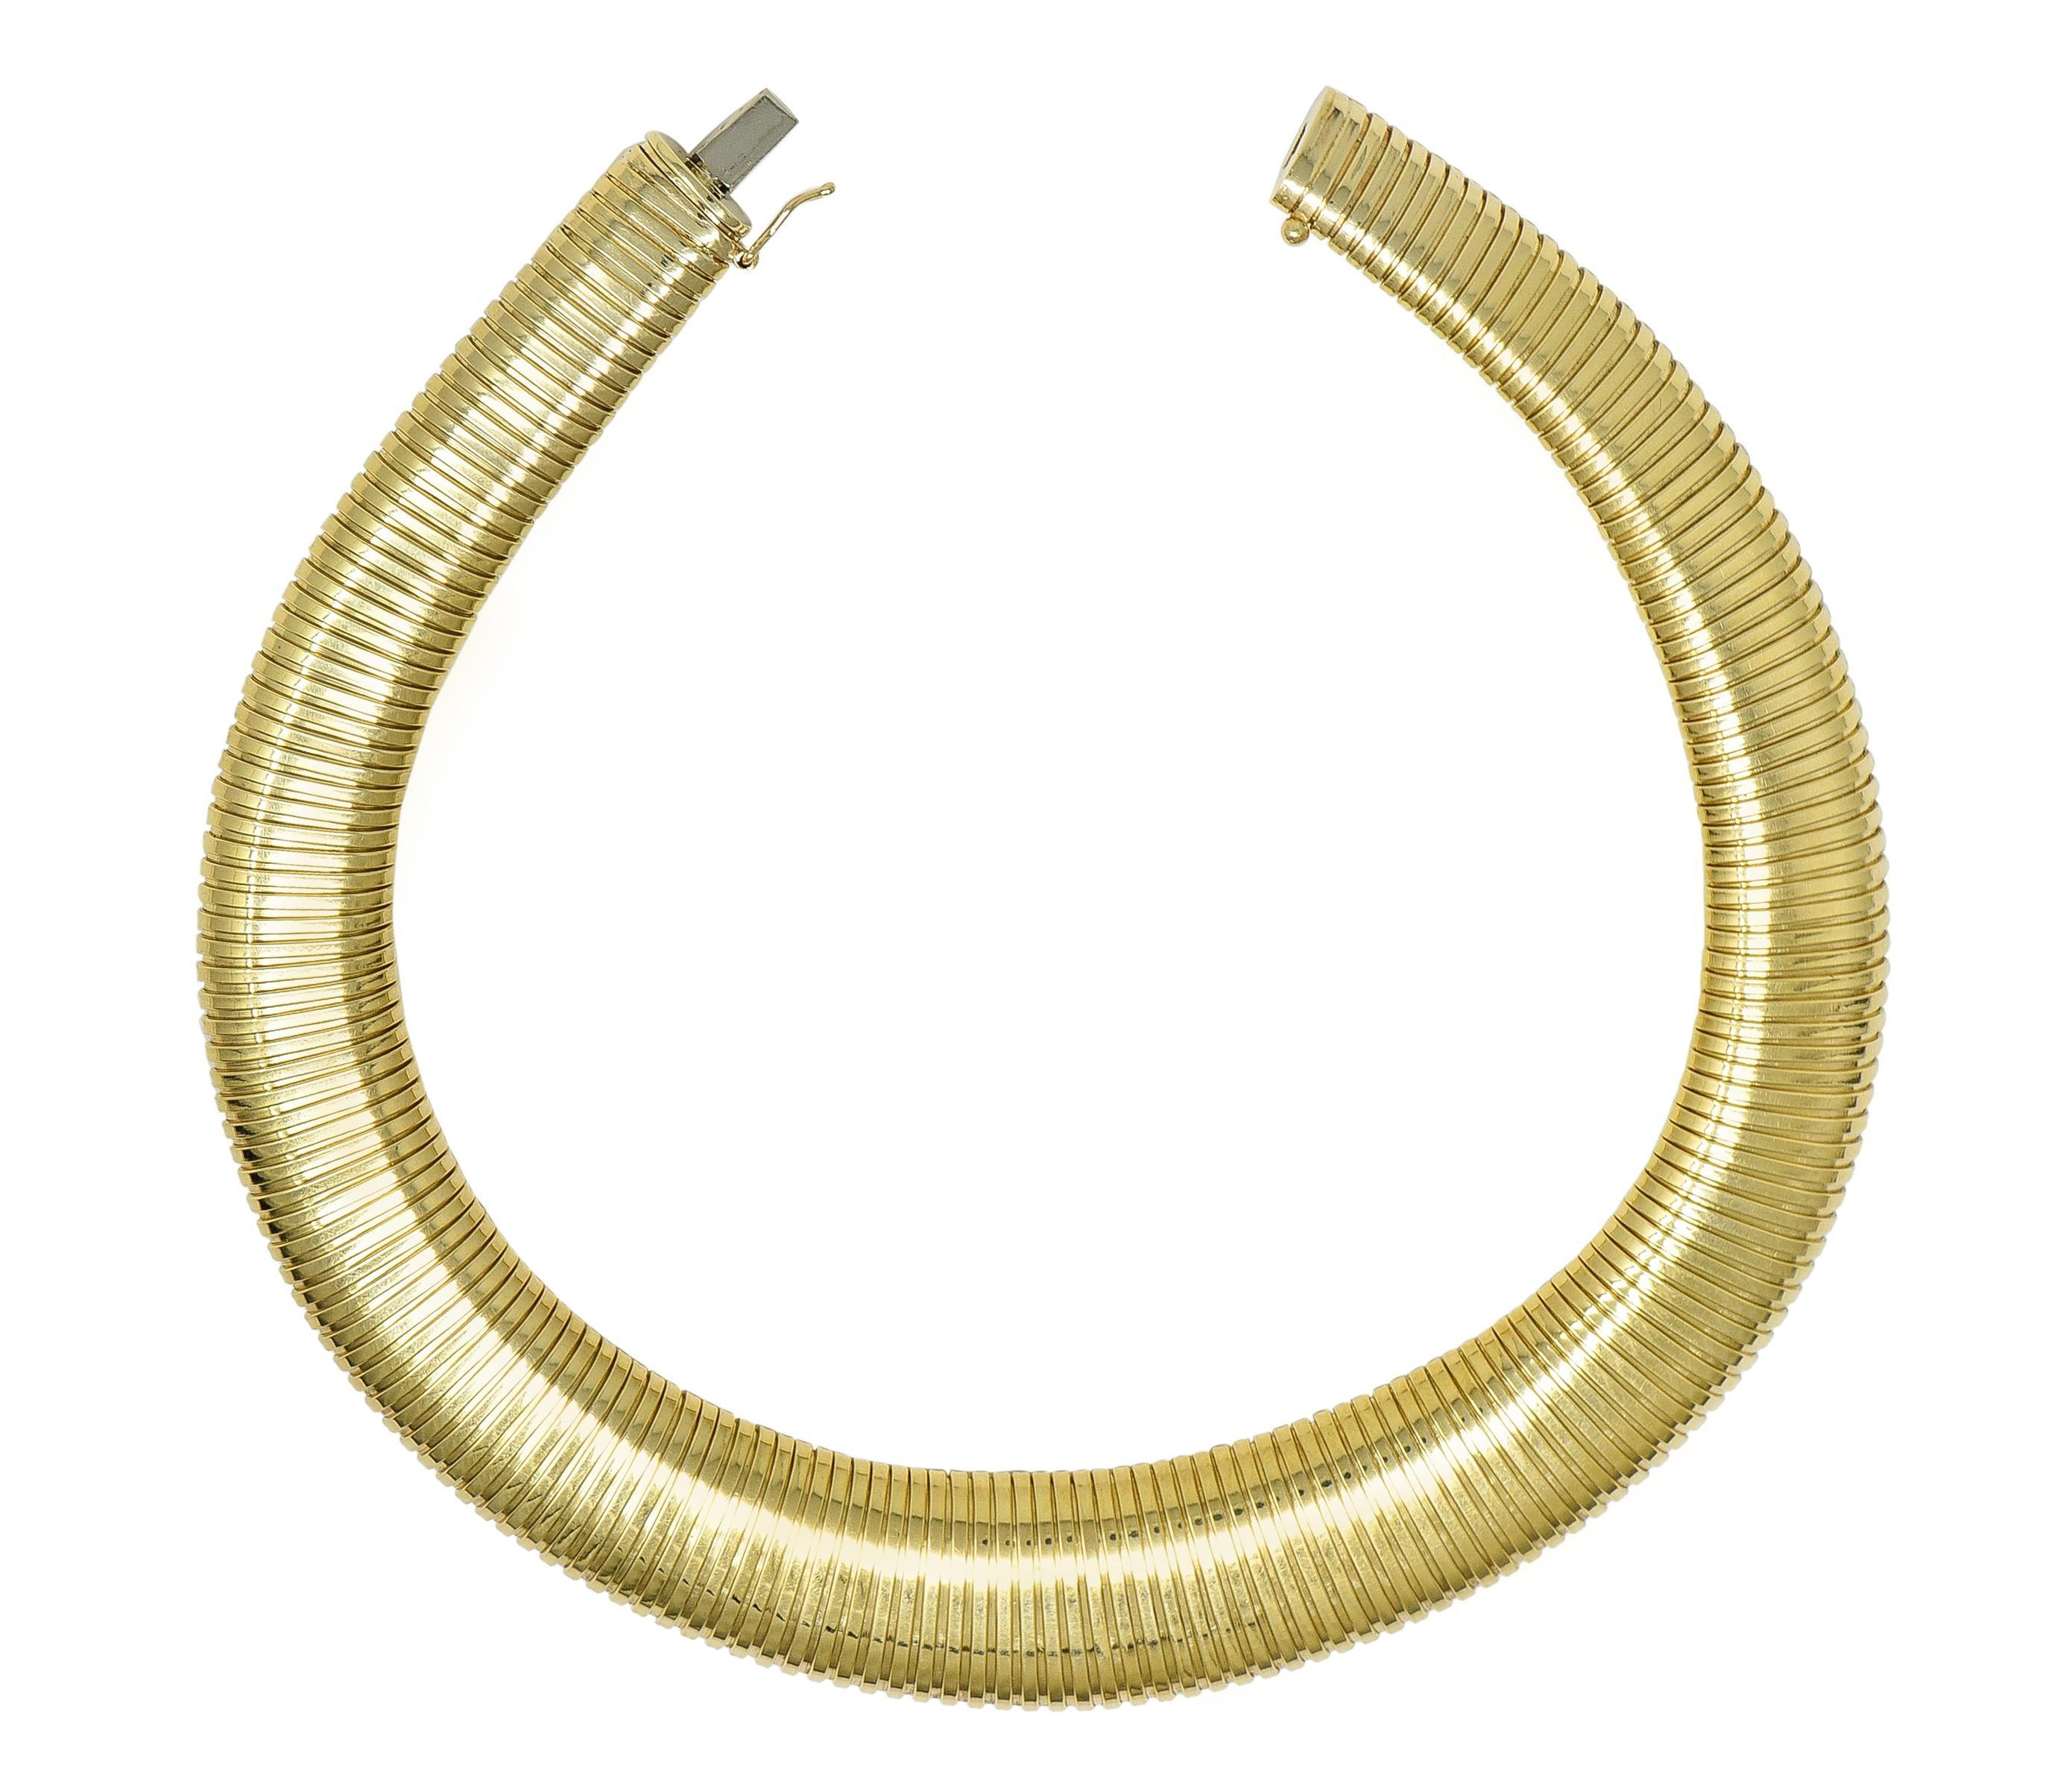 Designed as a graduated tubogas style necklace
Comprised of flexible segments
With high polish finish
Completed by concealed clasp closure
Stamped for 14 karat gold 
Stamped for Italy
Circa: 1980s
Width at widest: 13/16 inch 
Length: 16 inches
Total